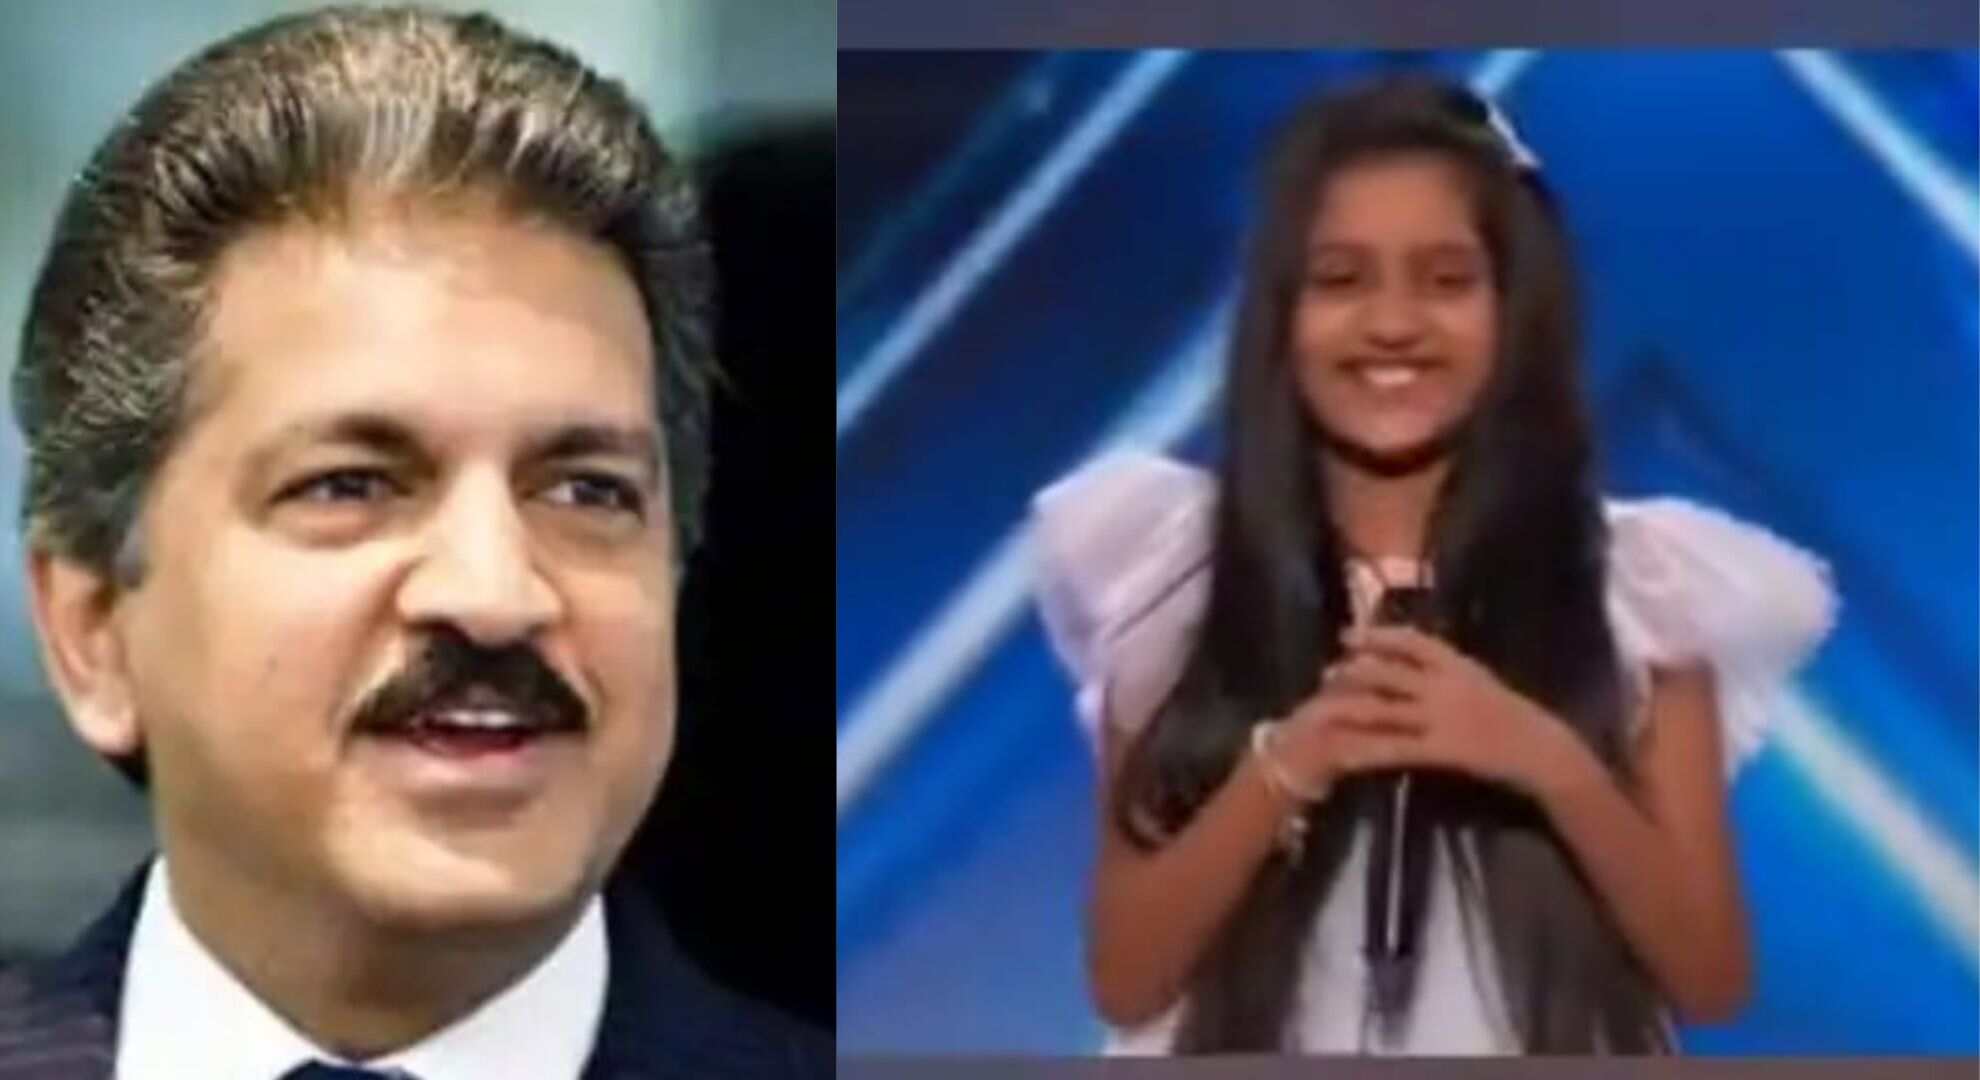 Mahindra Group chairperson Moved To tears By Pranysqa Mishra’s Performance On AGT